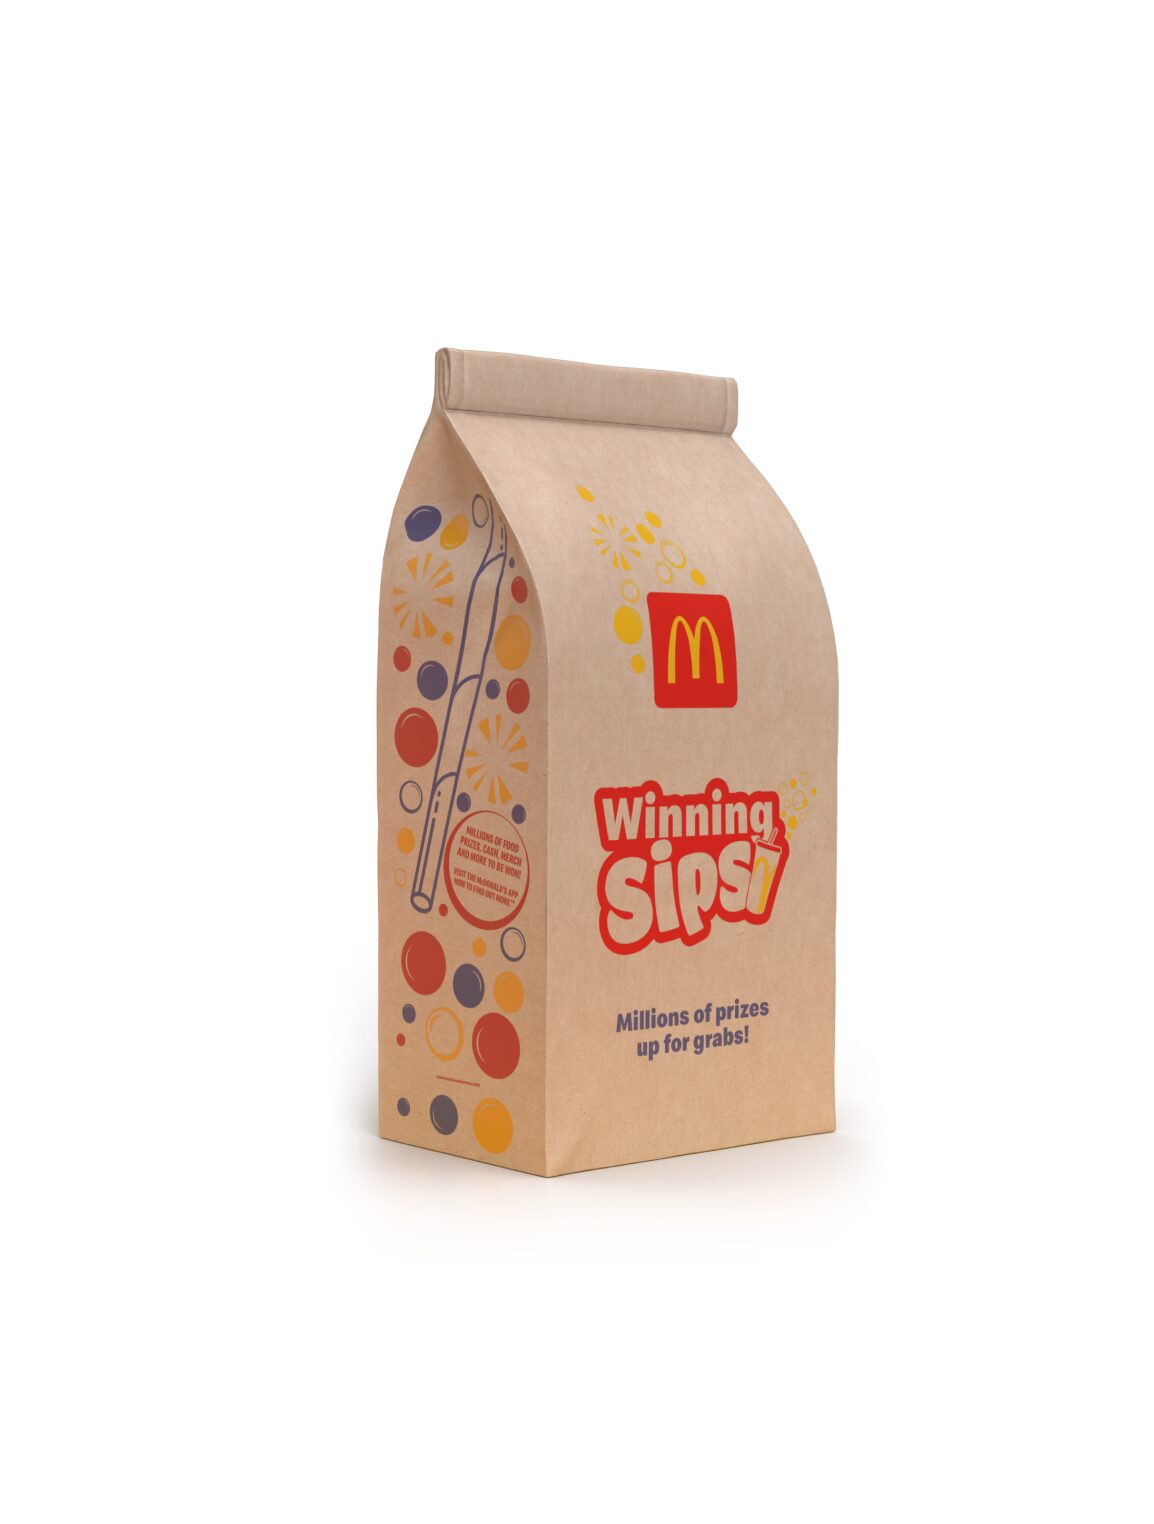 Image of the Winning Sips paper bag packaging with the McDonald's logo and text 